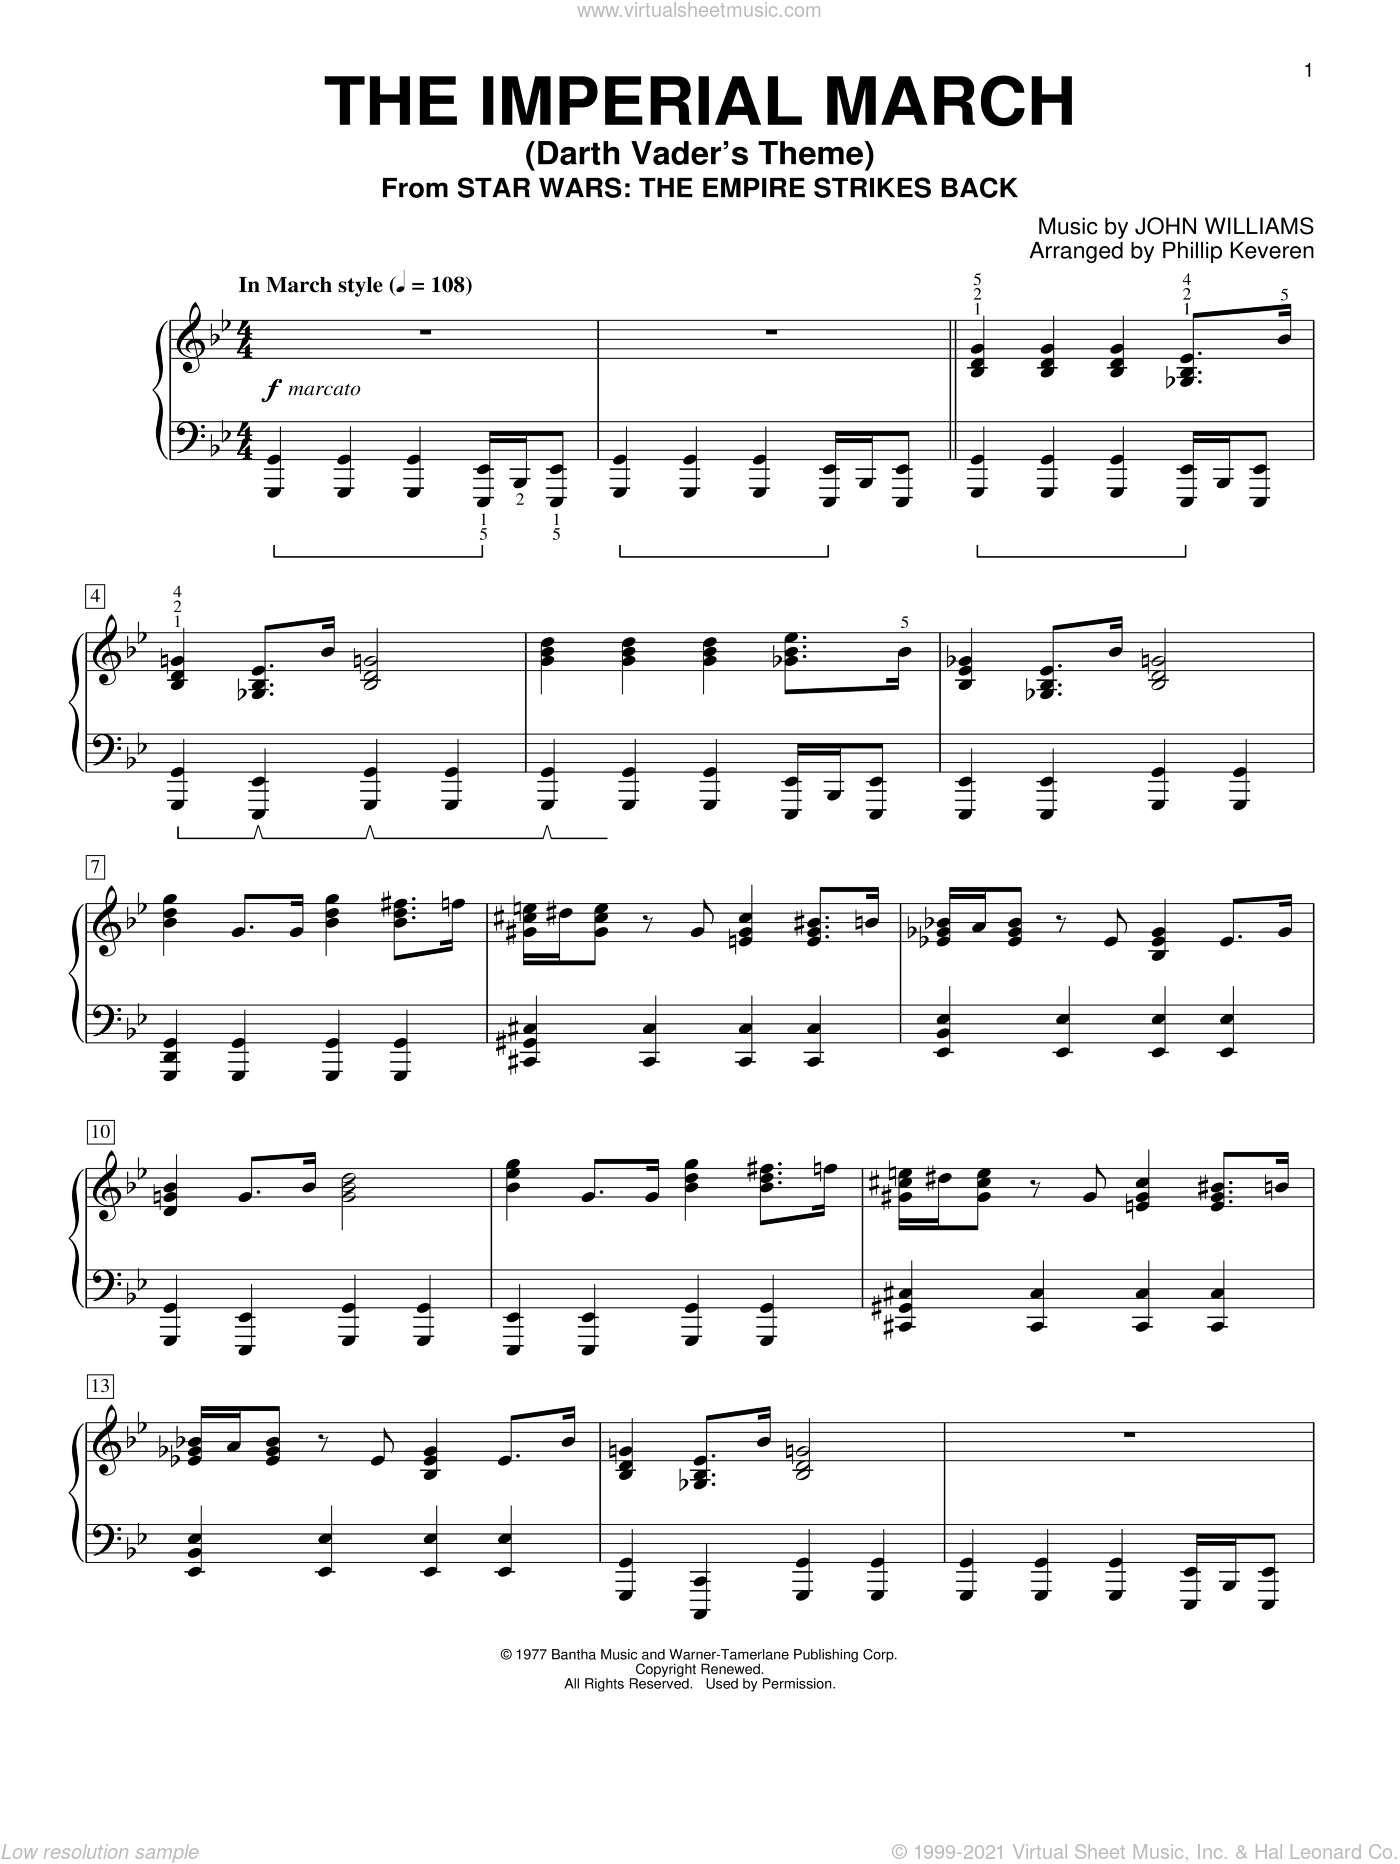 Williams - The Imperial March (Darth Vader's Theme) sheet music